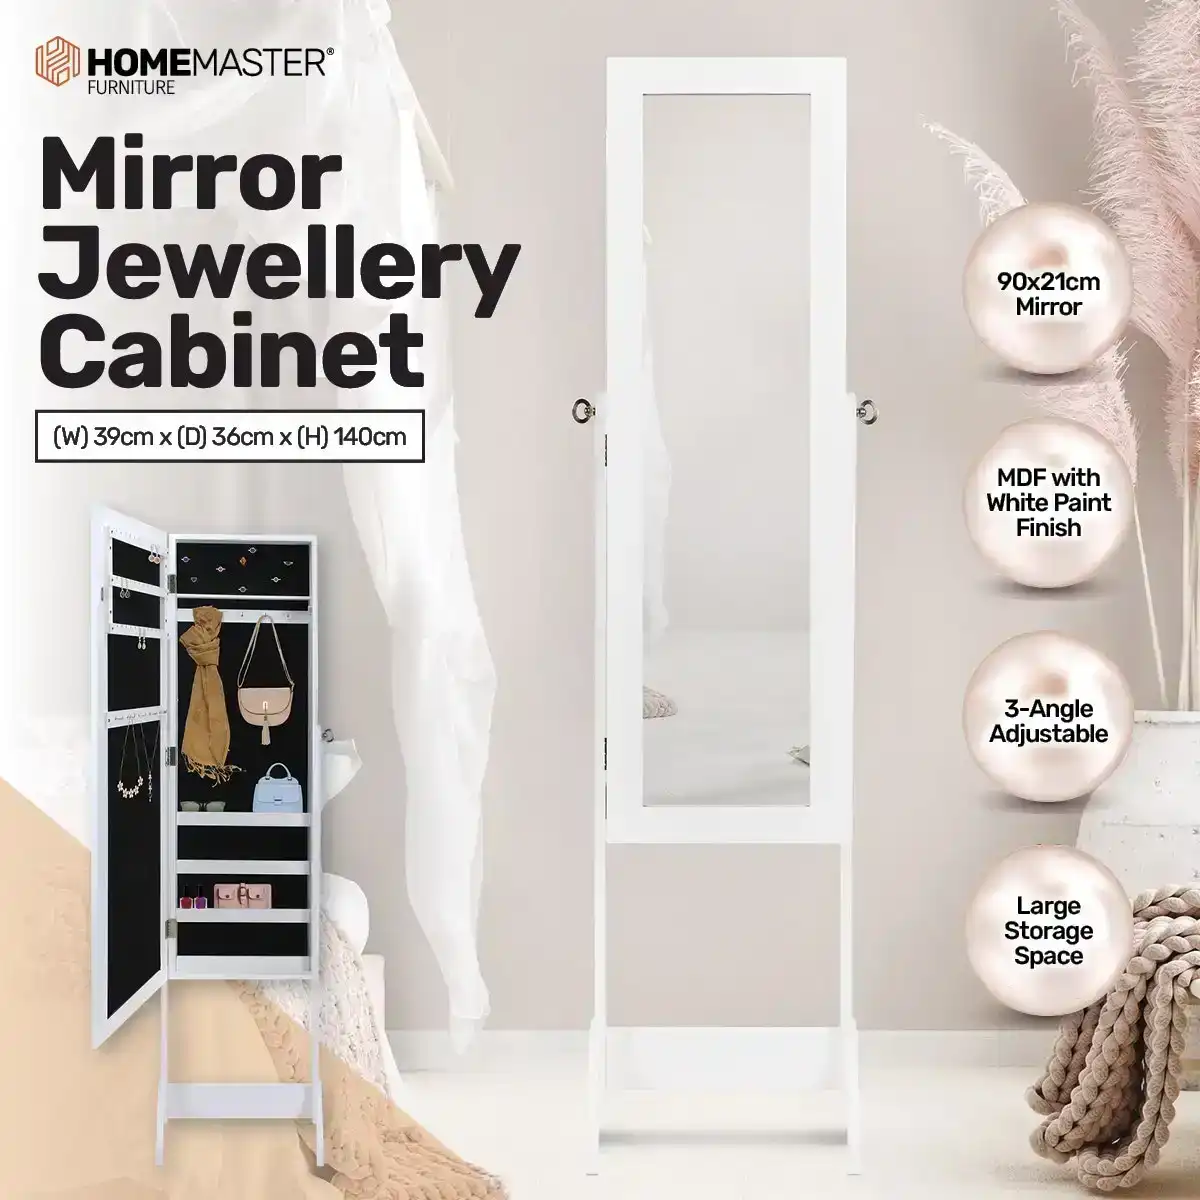 Home Master® 140cm Full Length Mirror Jewellery Cabinet Adjustable Angle